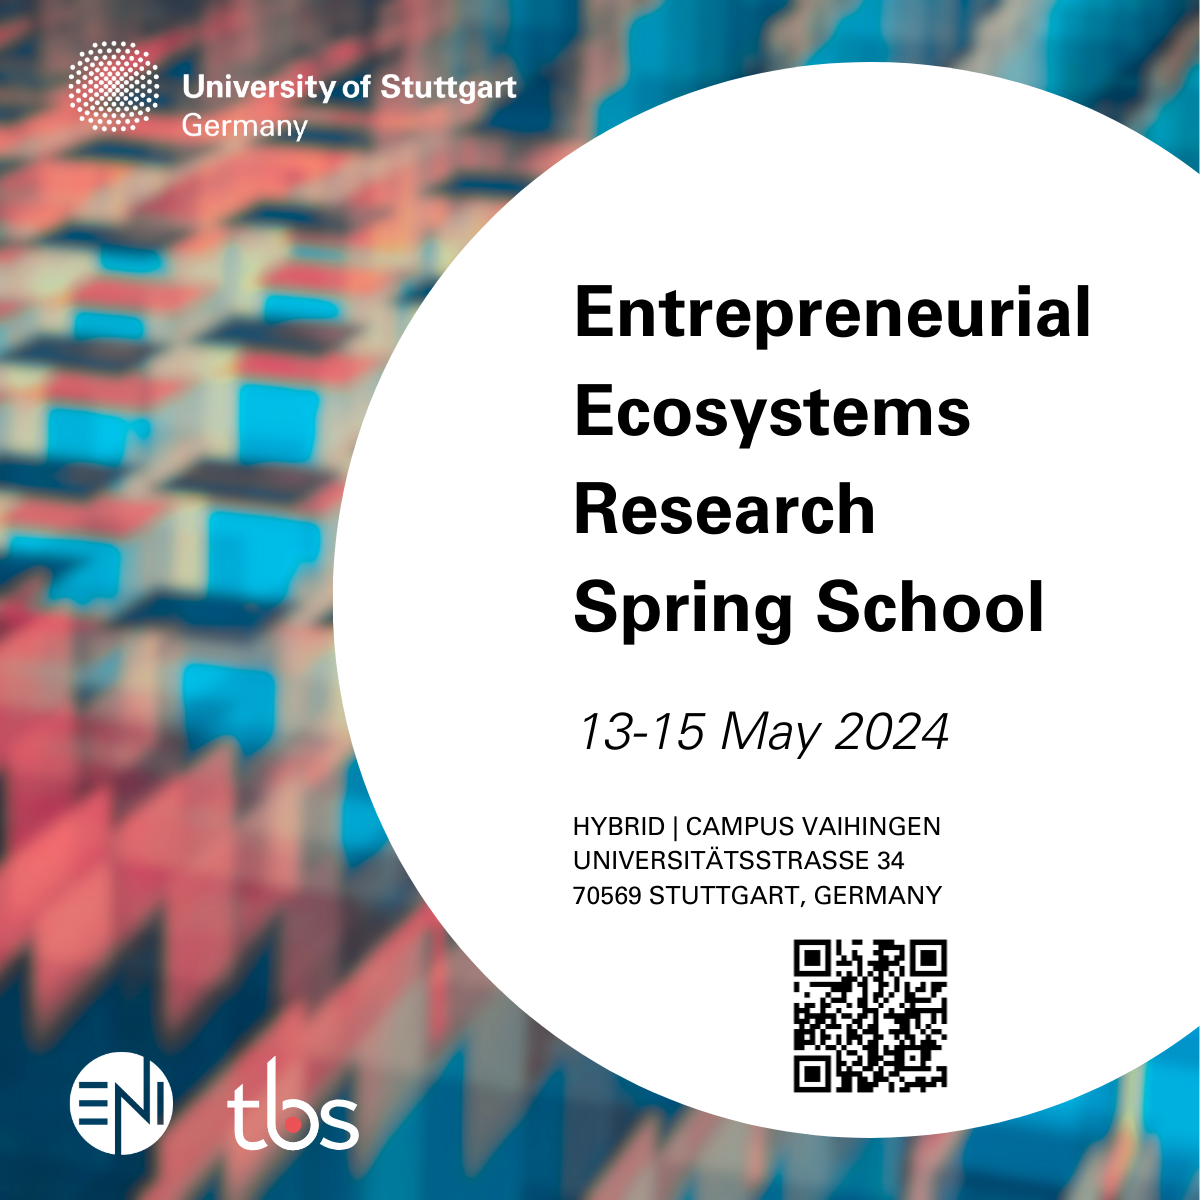 Invitation to the Entrepreneurial Ecosystems Research Spring School 2024: 13-15 May in Stuttgart (hybrid event).